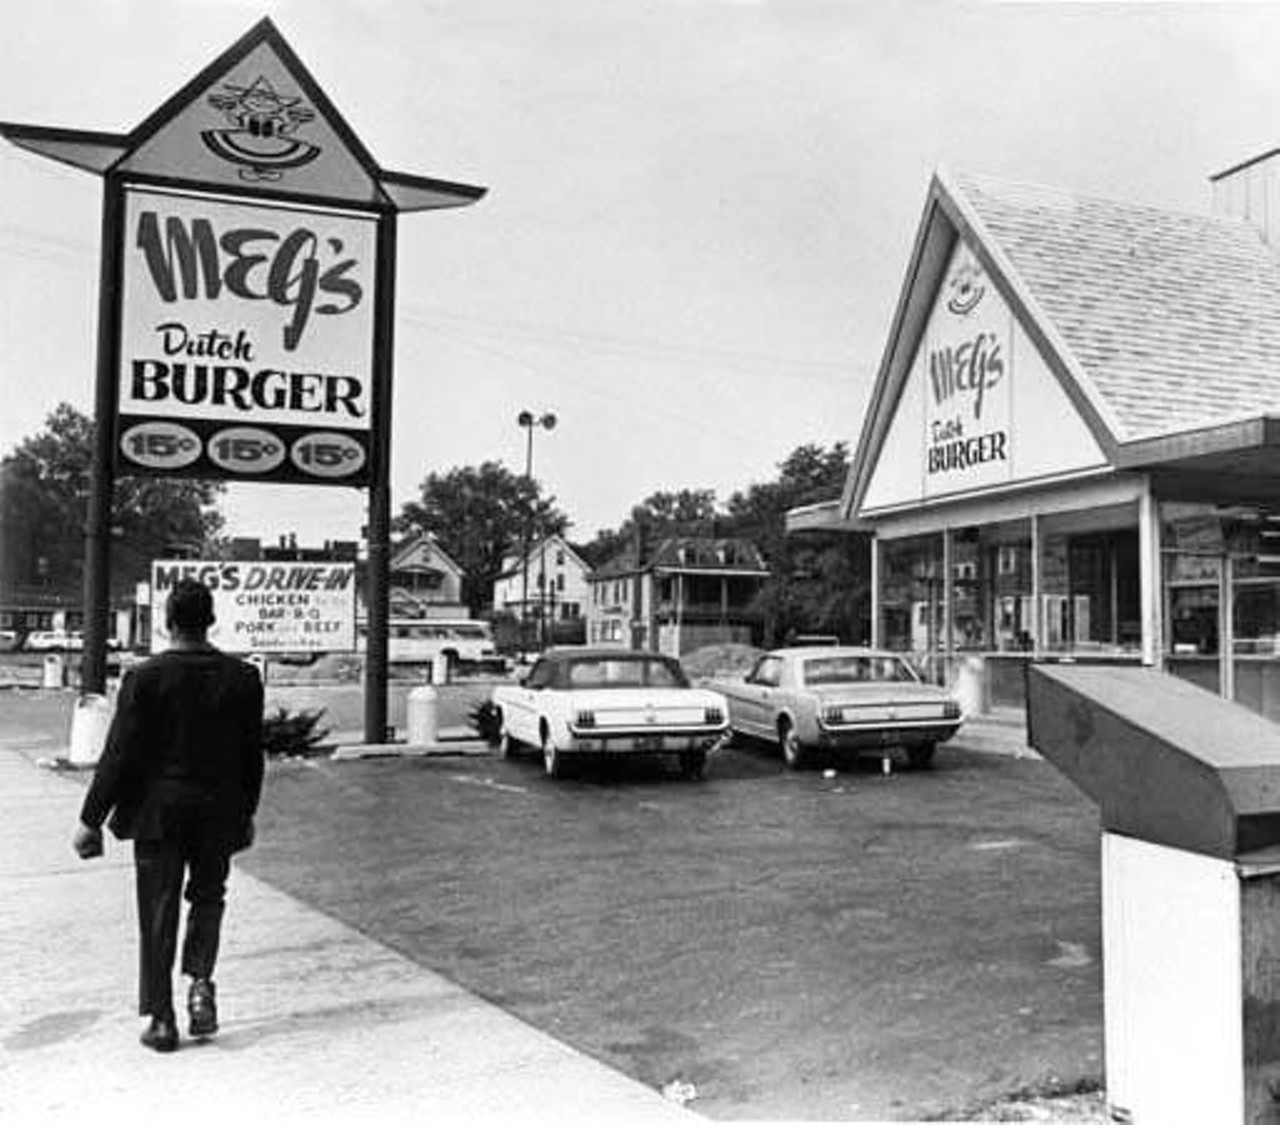 Meg's Drive-in. 11020 St. Clair, Sept. 19, 1967